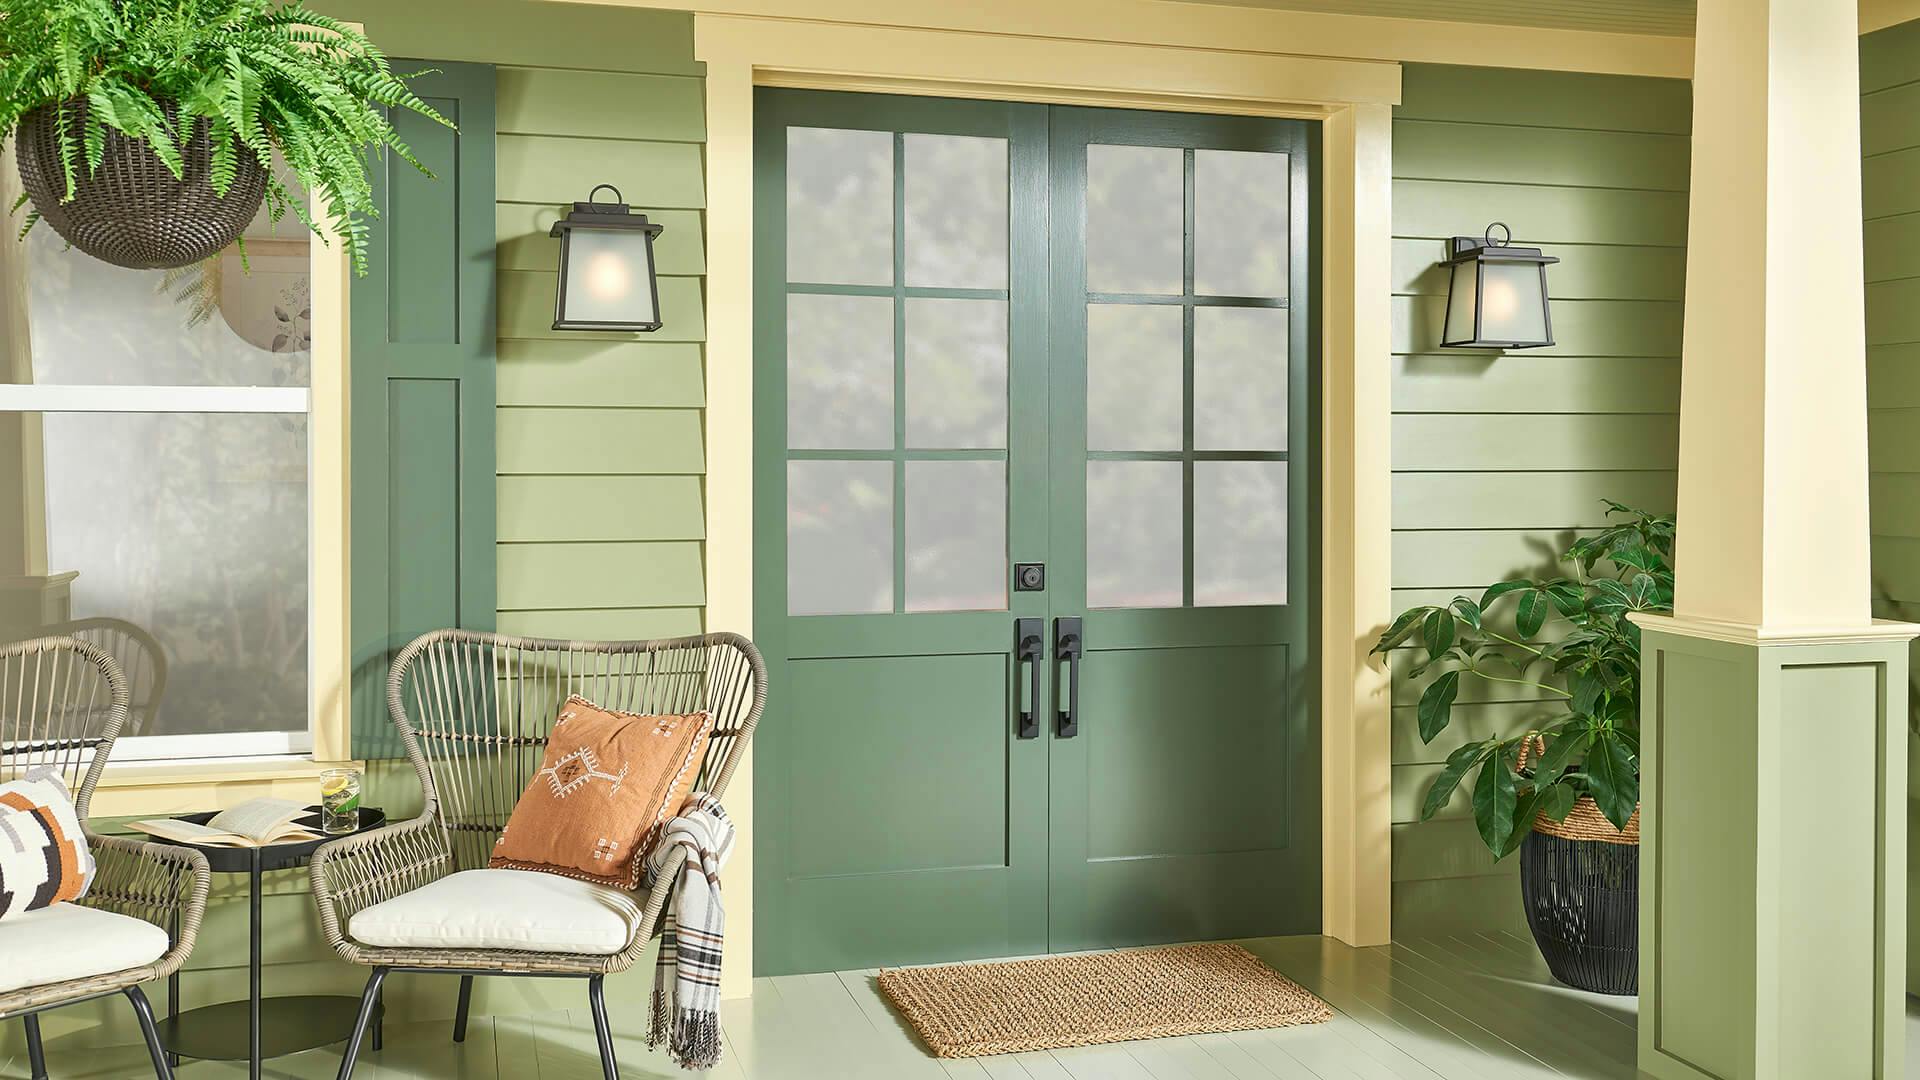 Exterior of a patio painted in different shades of green, featuring two Noward sconces on either side of the front doors